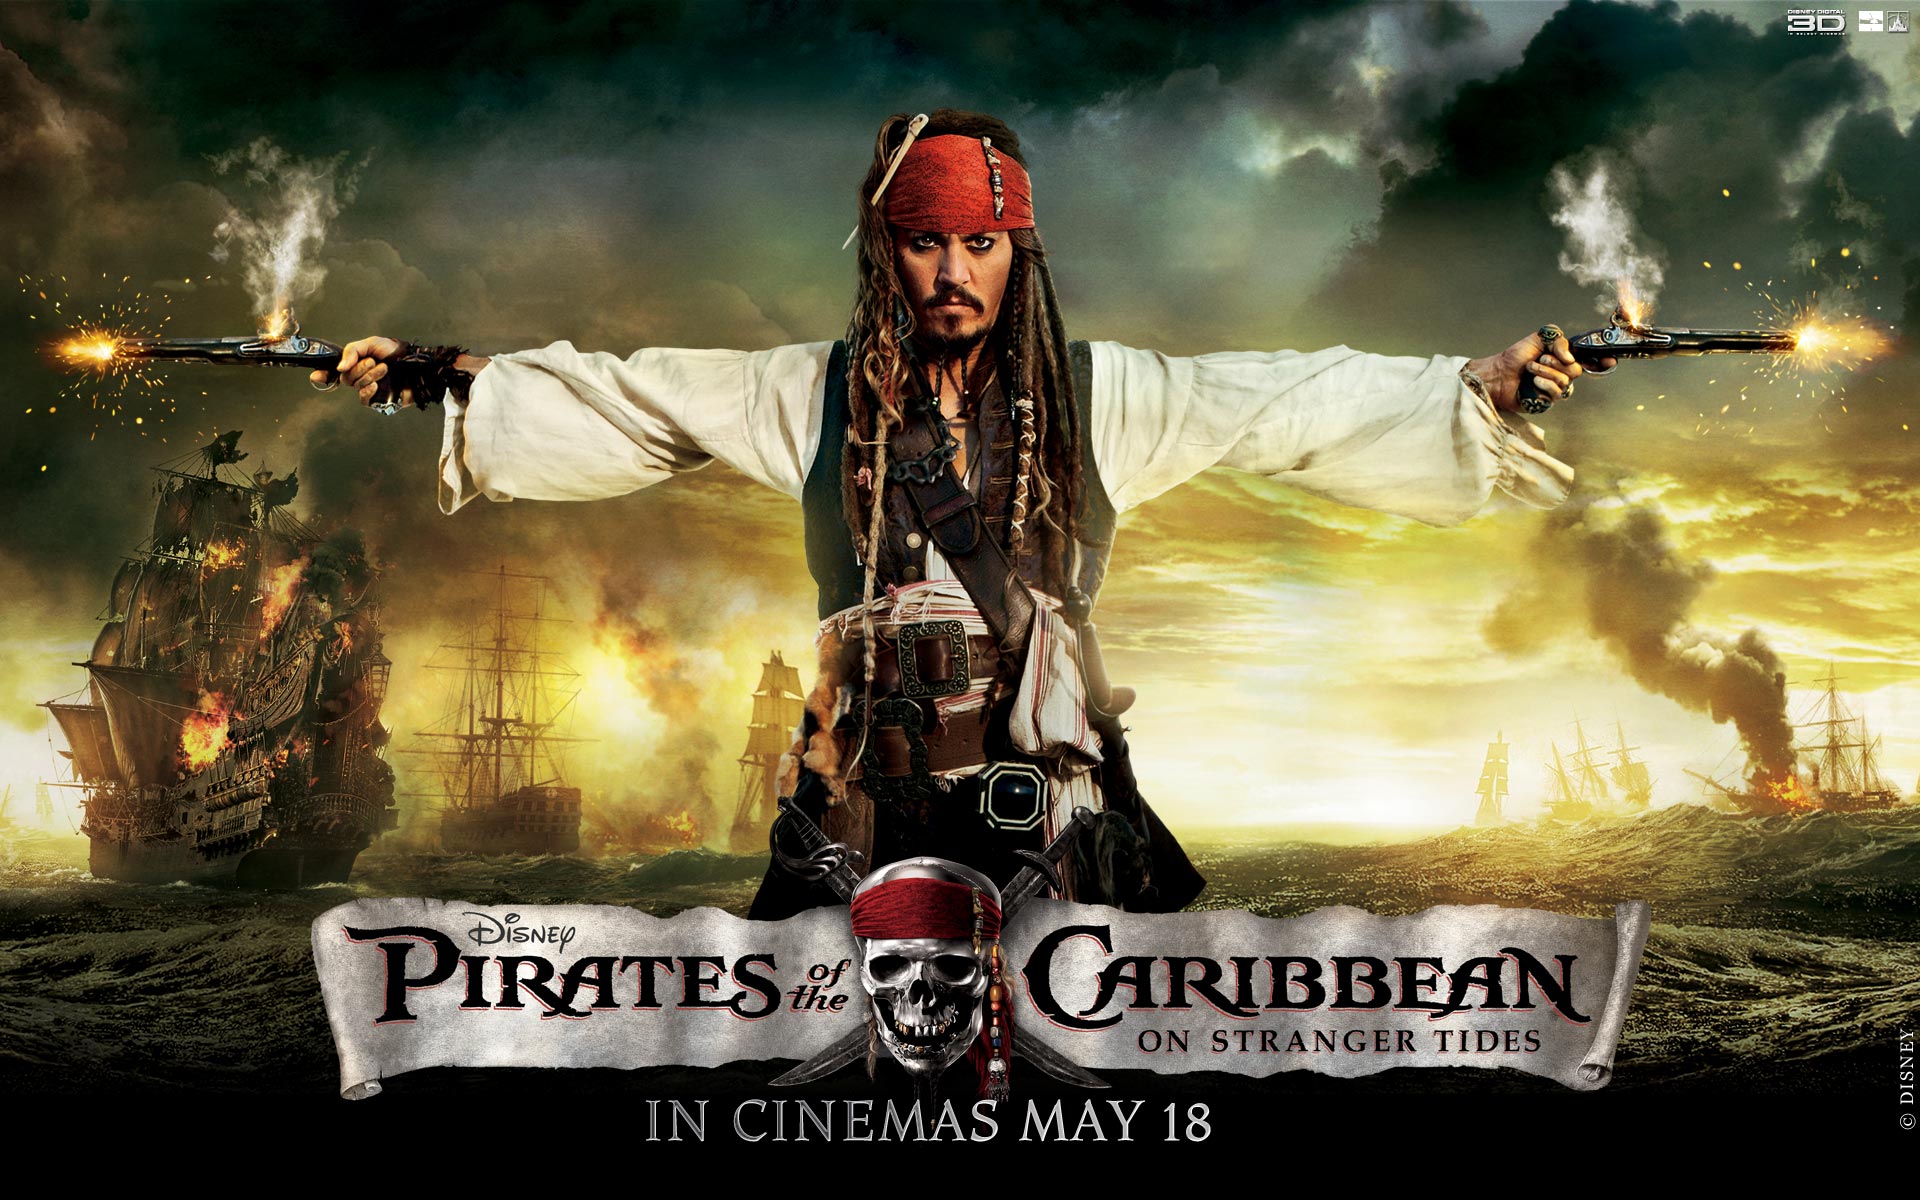 jack sparrow, pirates of the caribbean, pirates of the caribbean: on stranger tides, johnny depp, movie